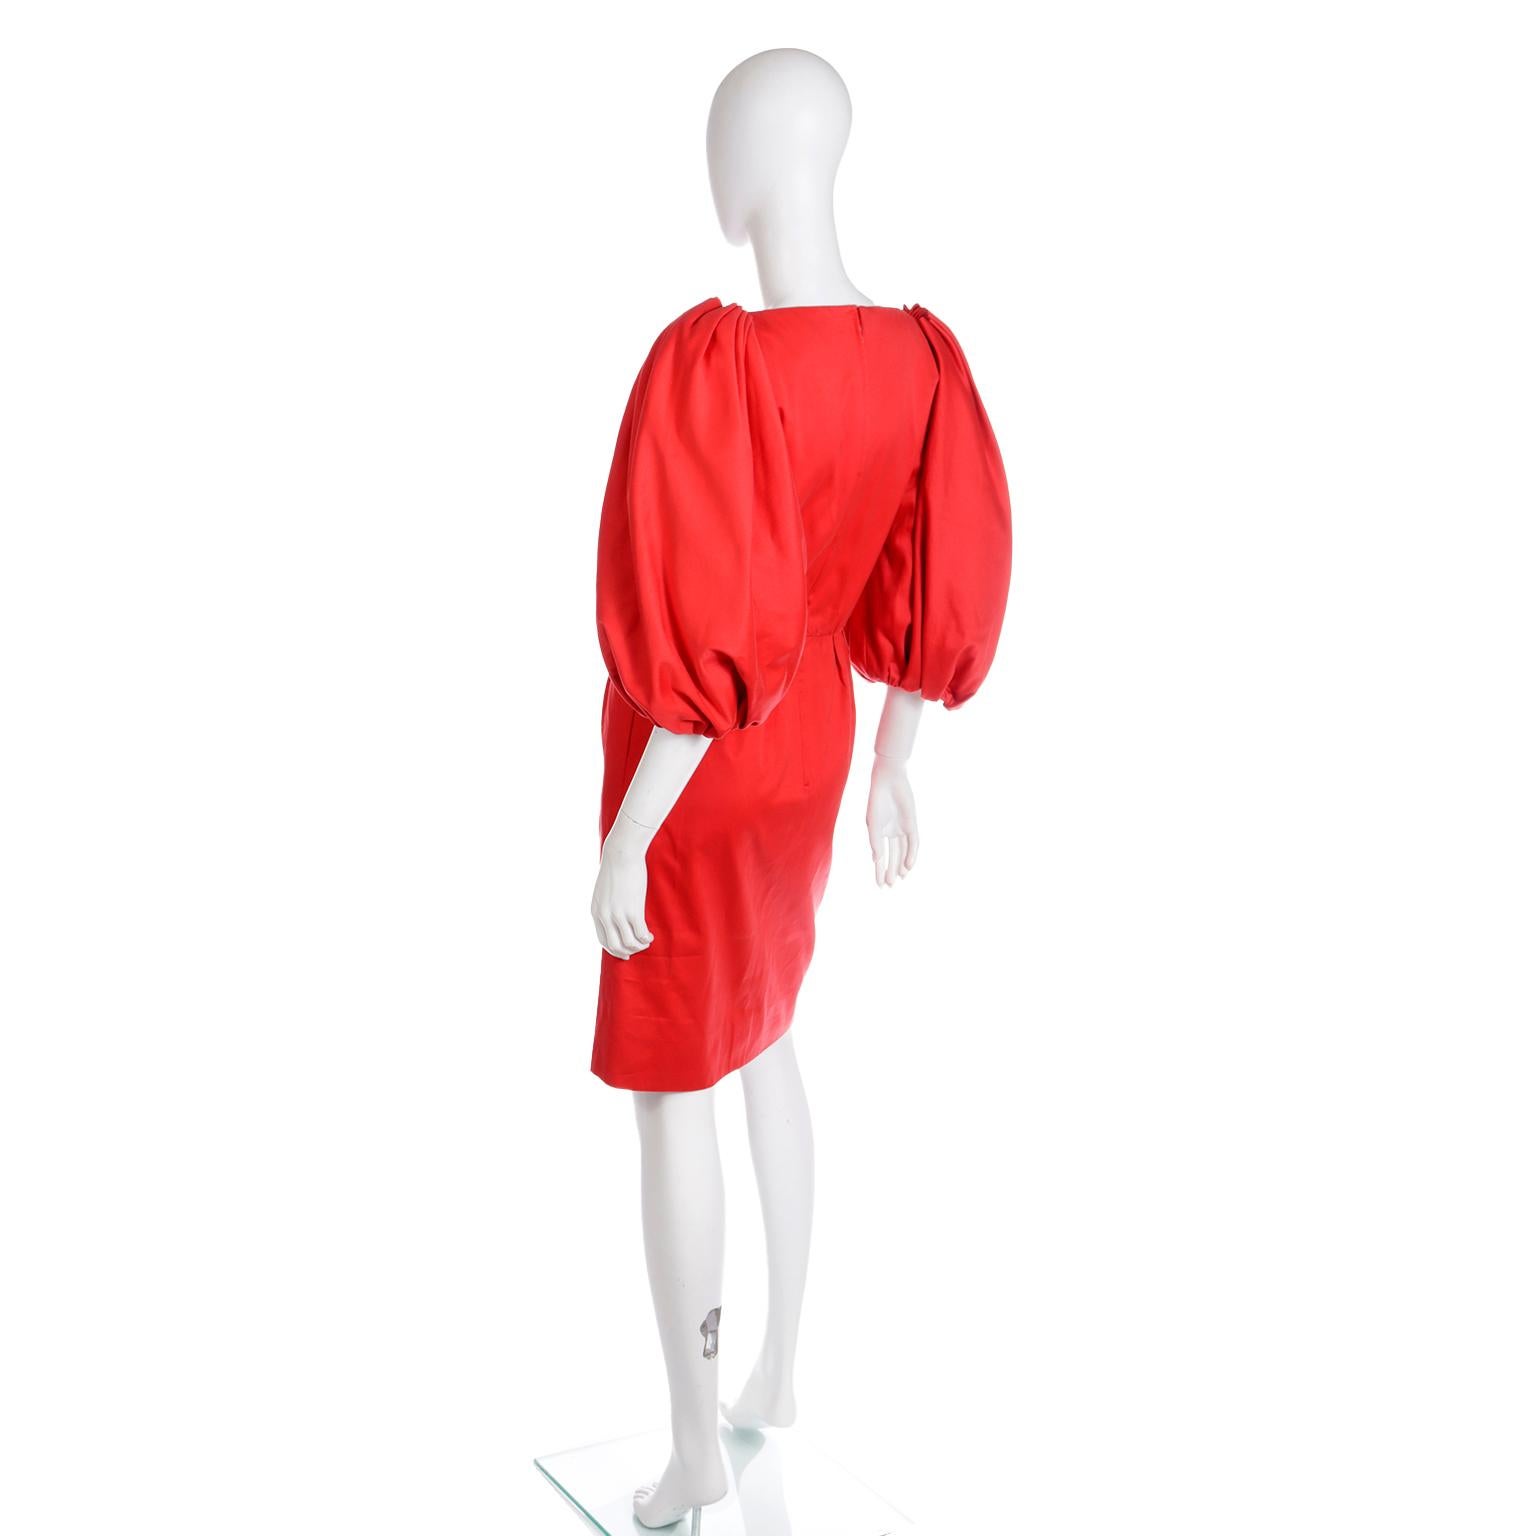 Yves Saint Laurent 1989 Vintage Red Runway Dress with Puff Statement Sleeves 4